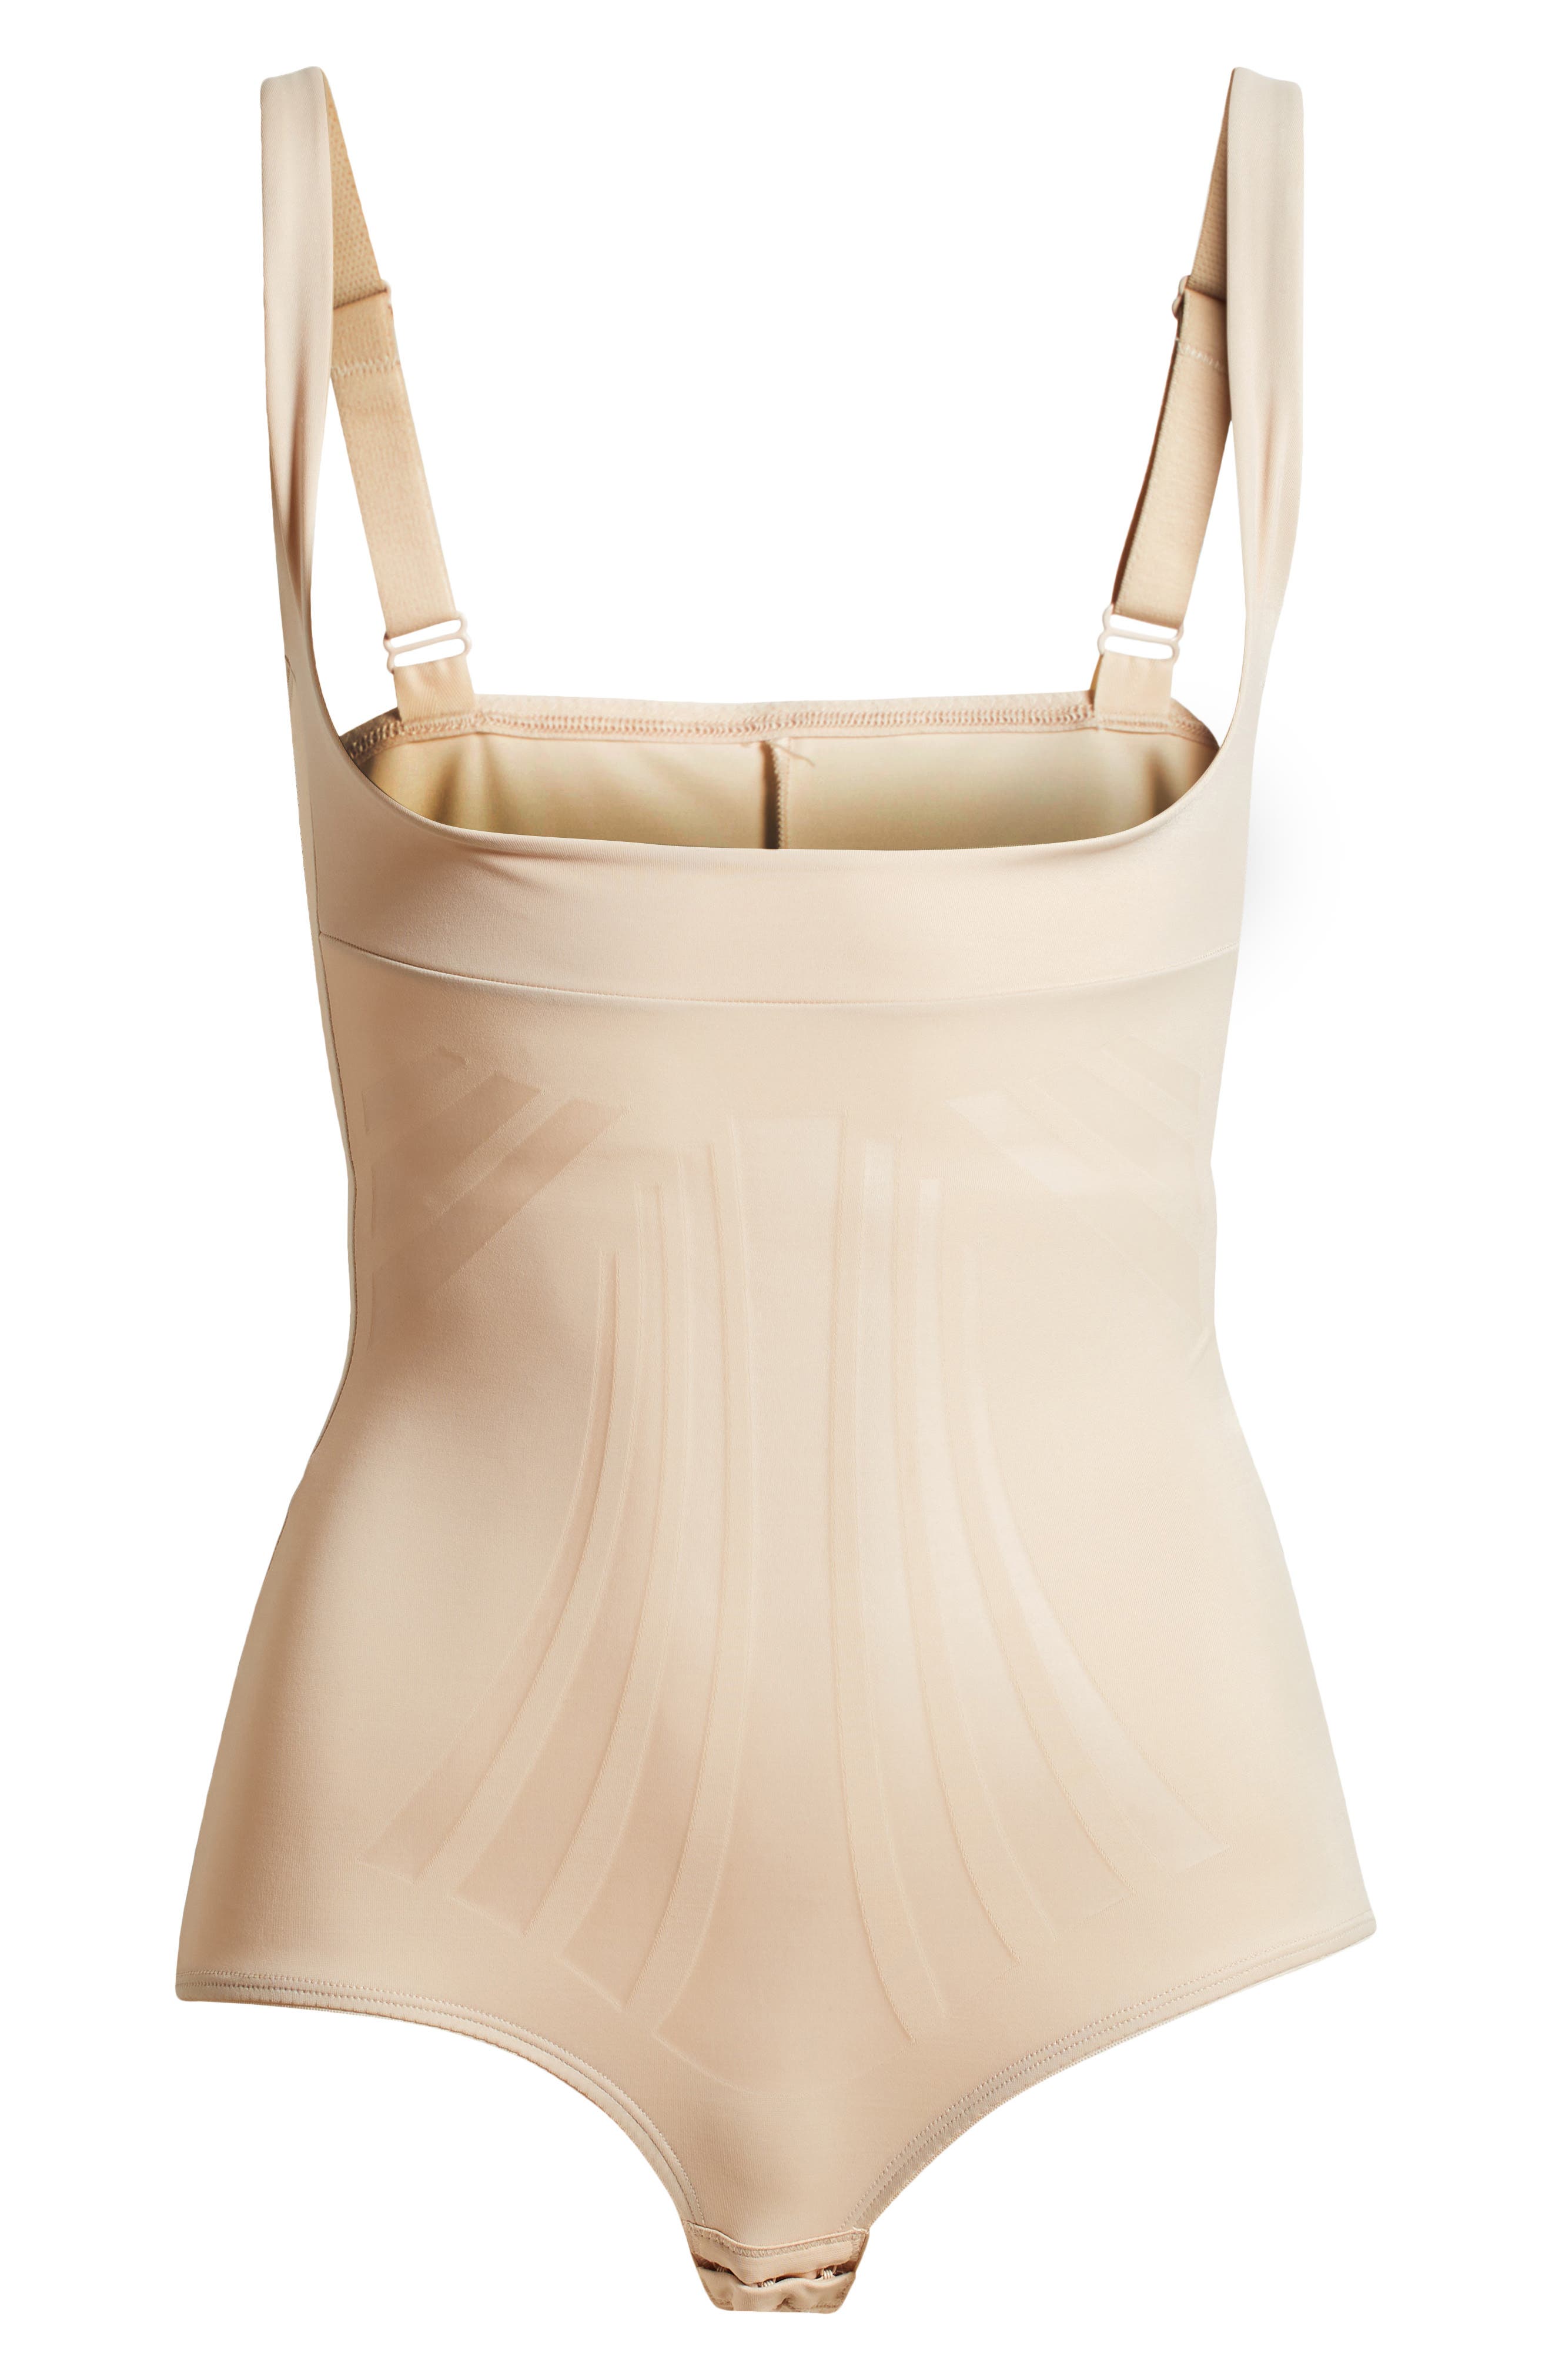 Miraclesuit® Sheer Underwire Bodybriefer